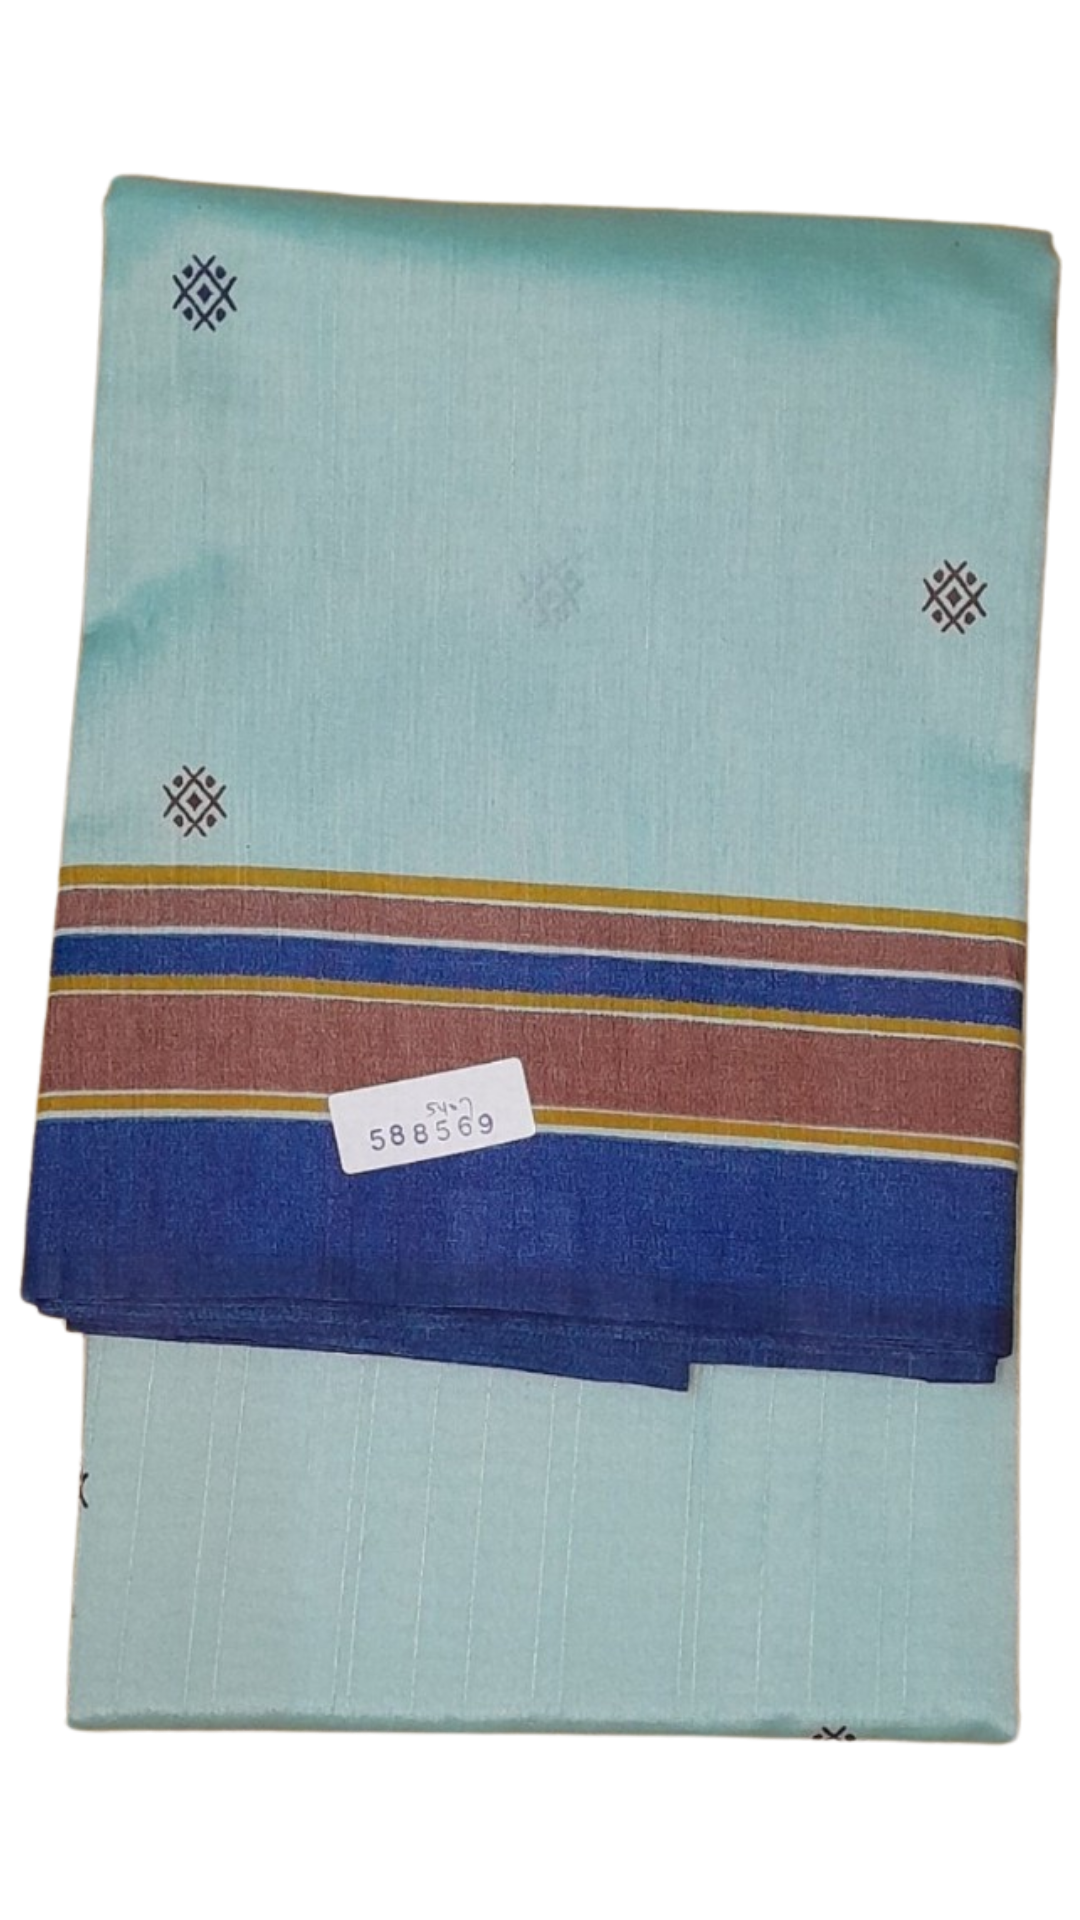 Forever Trending Royal Blue Turquoise Blue SIlk Cotton Saree Embellished With Navy Blue & Brown Motifs - With Blouse - SonaMandir